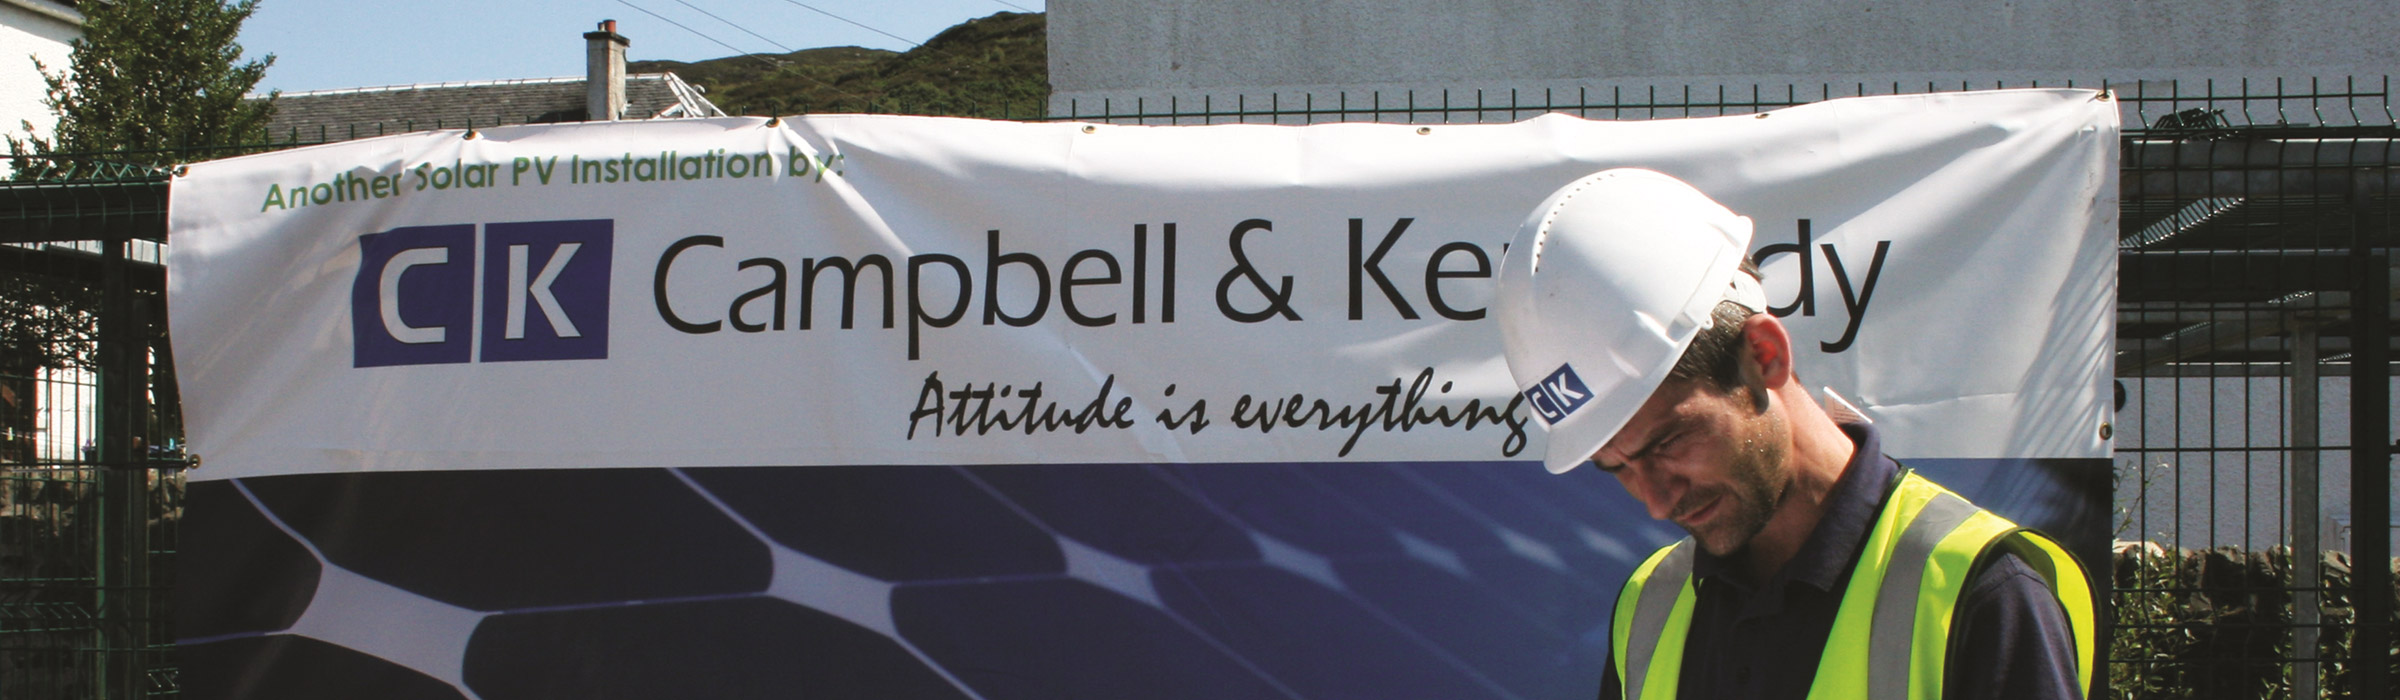 Campbell Kennedy signage with worker